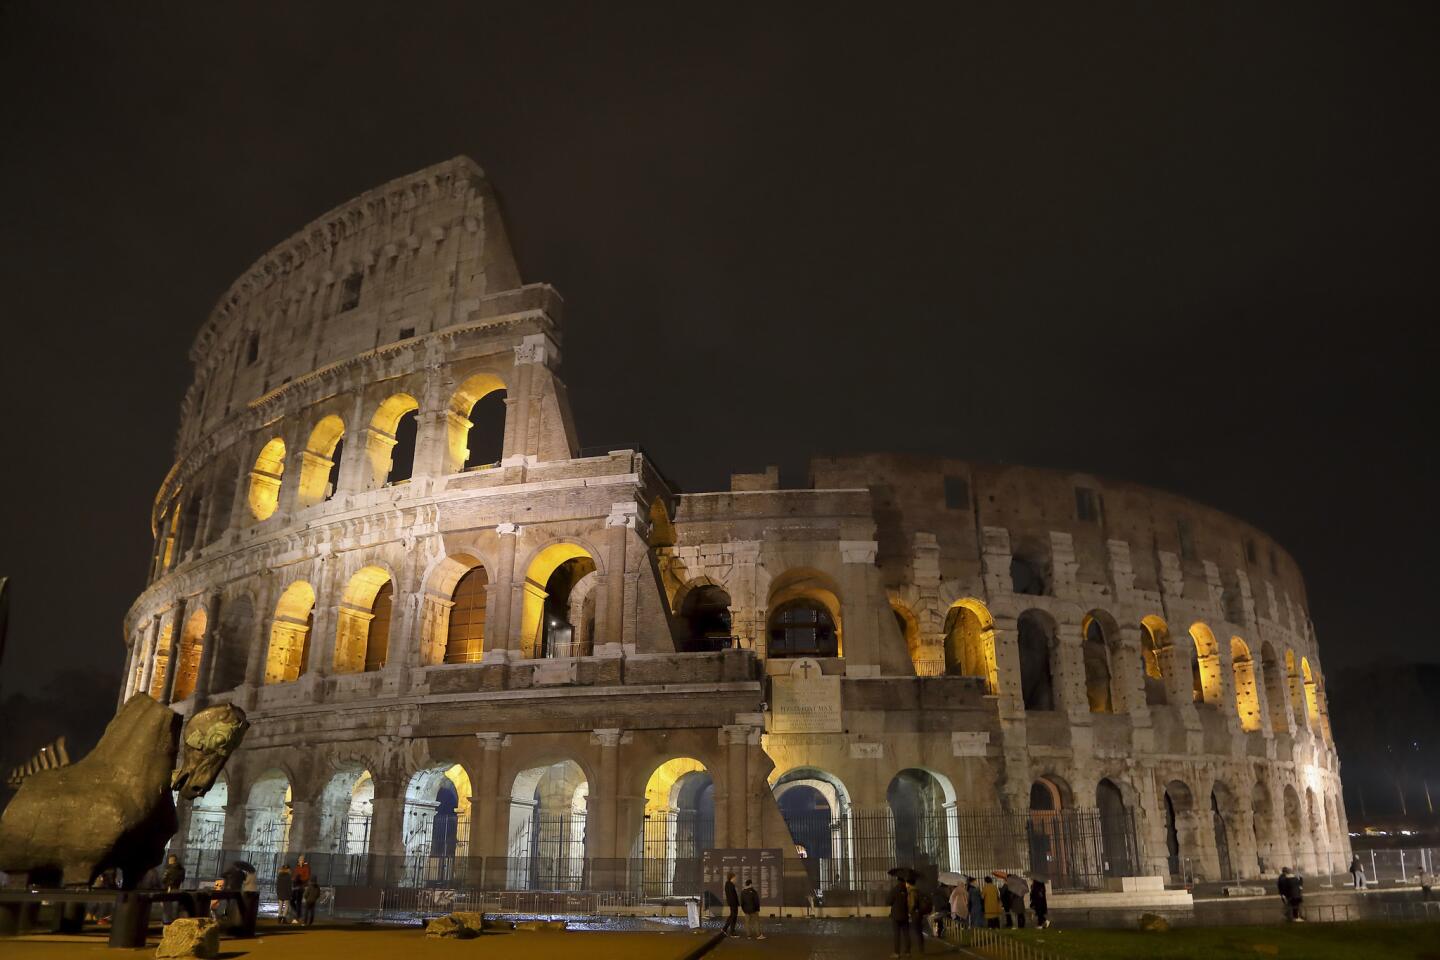 The Colosseum, also known as the The Flavian Amphitheatre, is in the center of Rome. It is shown illumintated at night Jan. 2.